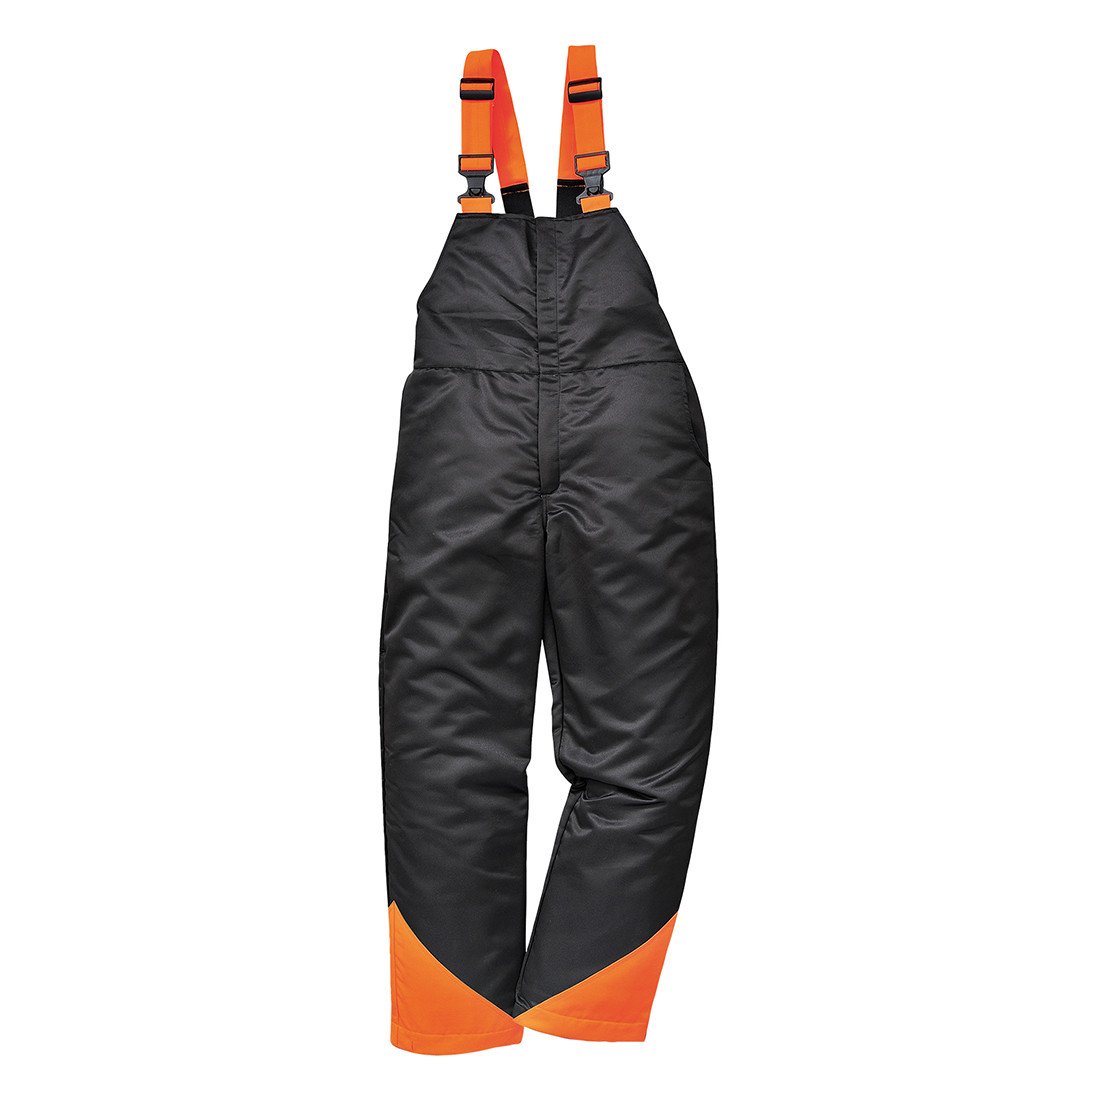 Portwest CH12 Oak Forestry Bib and Brace Overall in Black